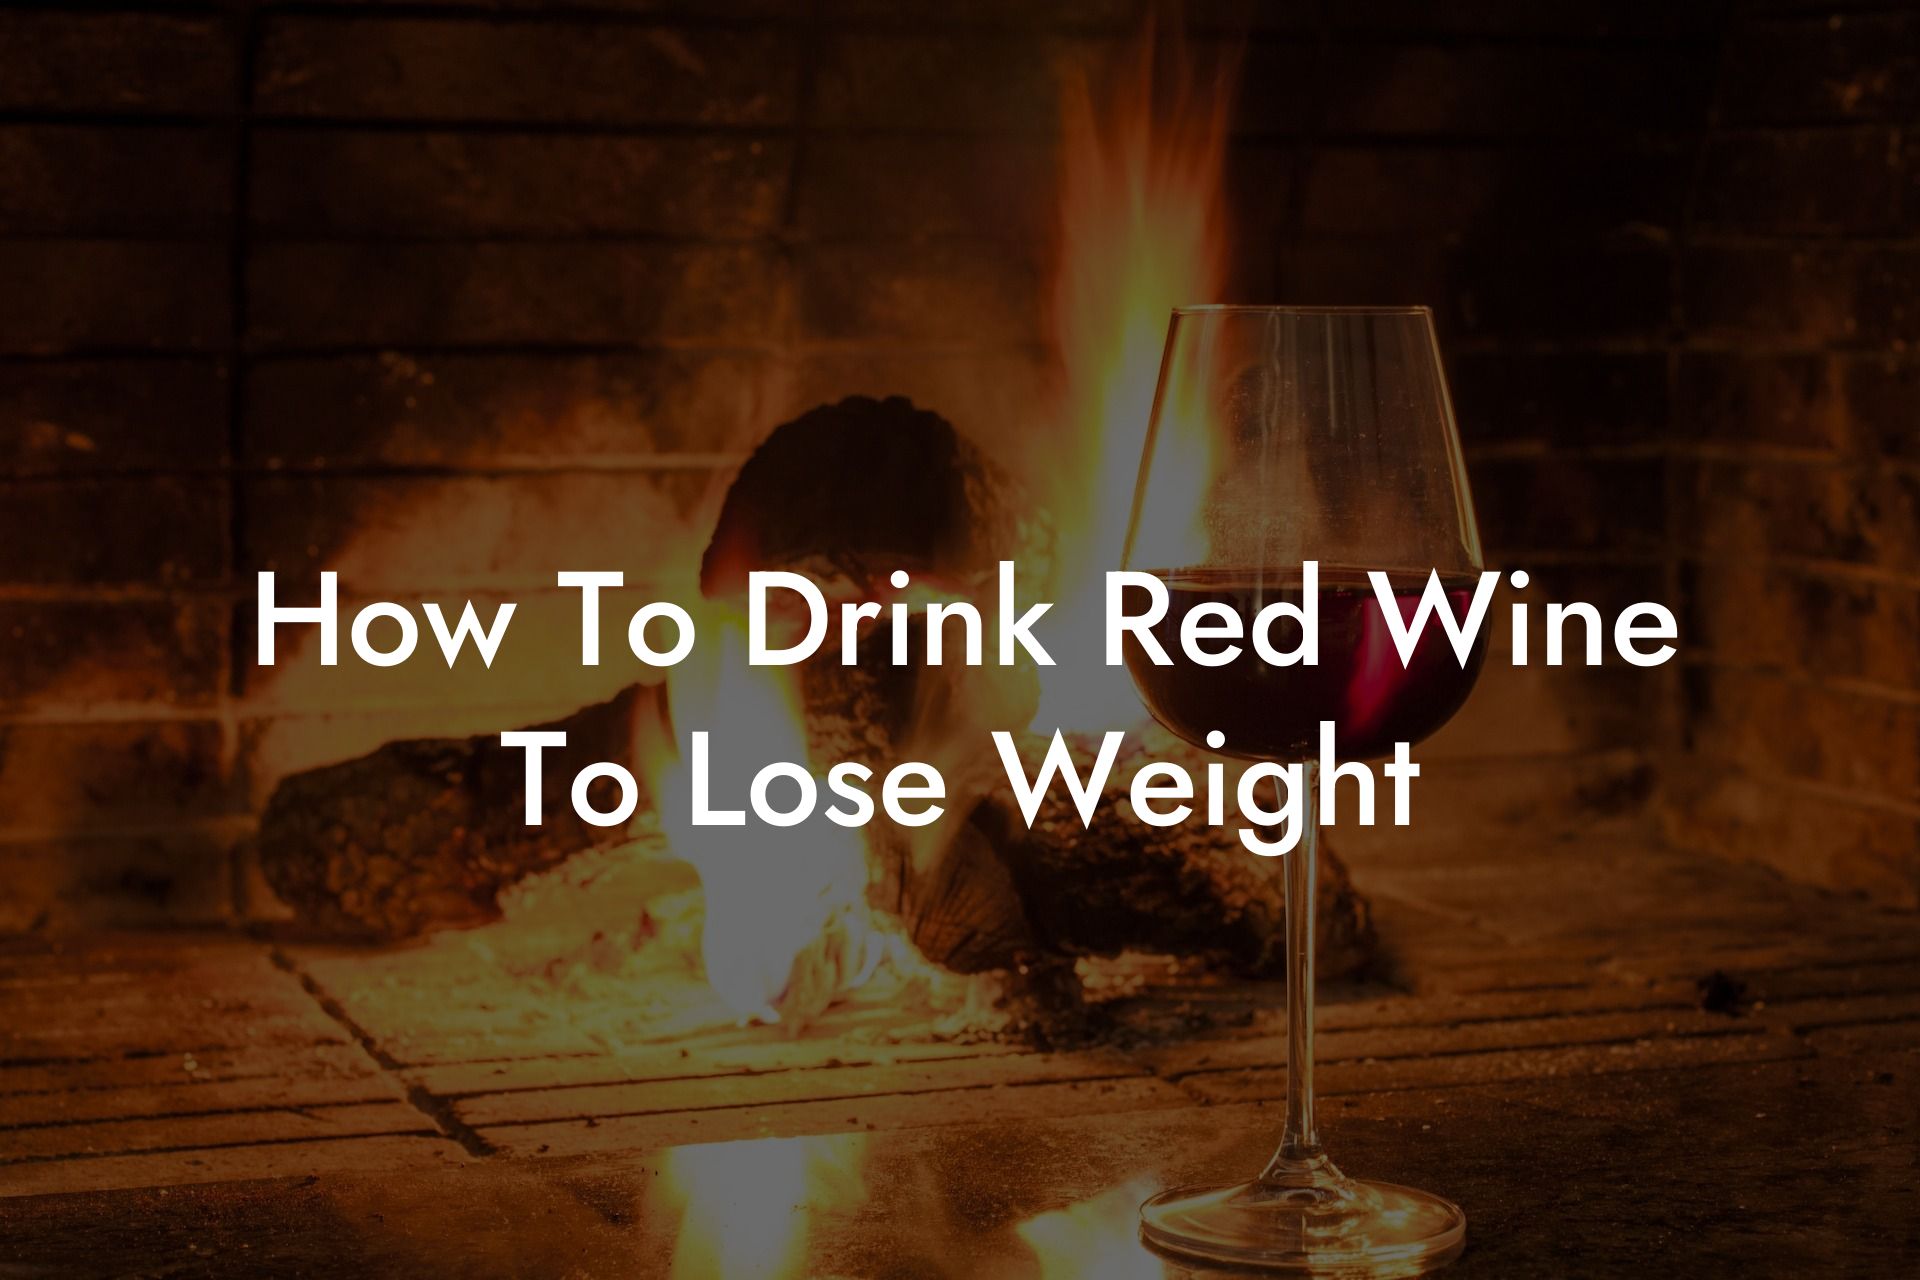 How To Drink Red Wine To Lose Weight